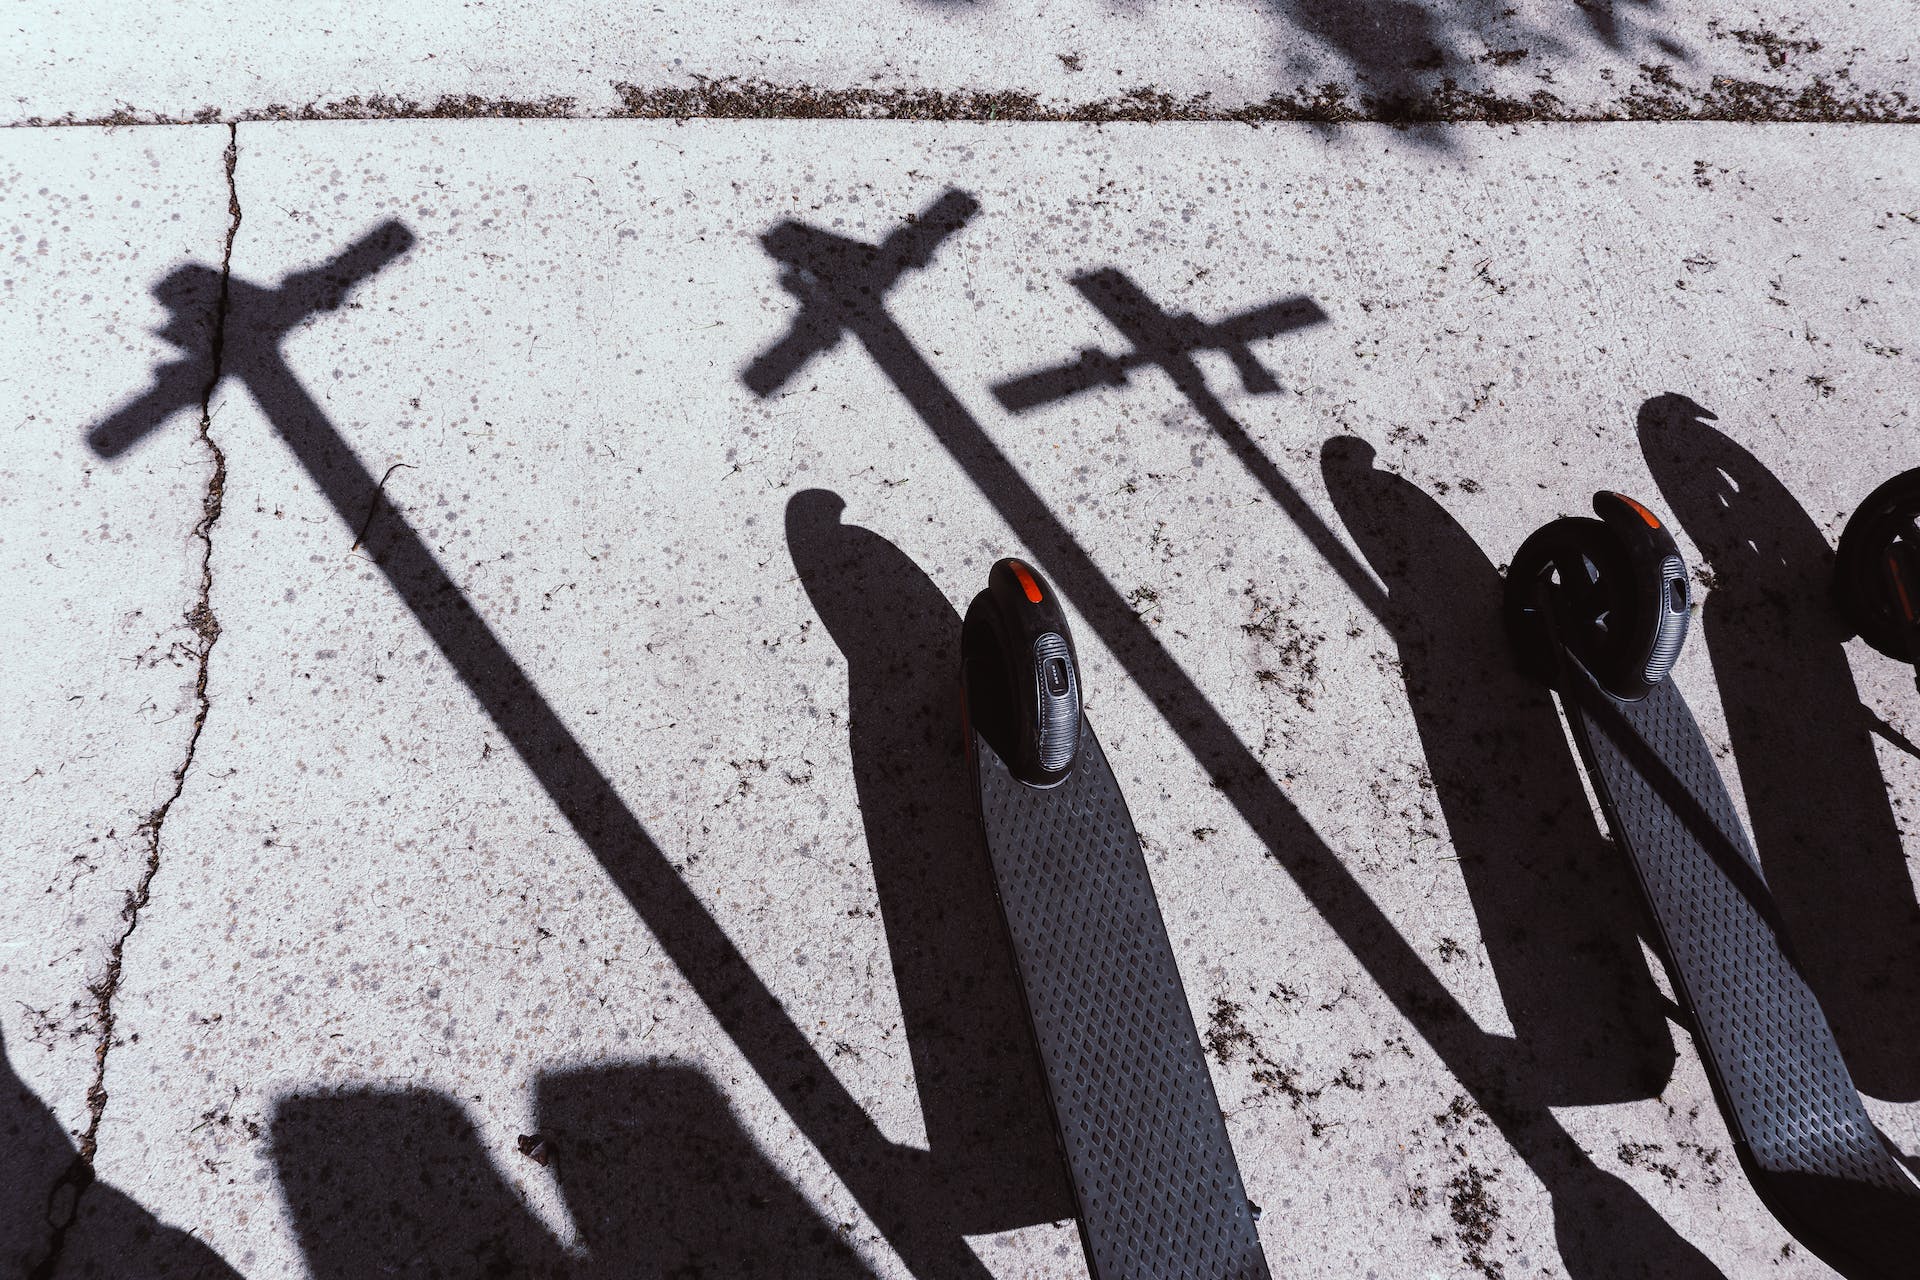 Black e-scooters and shadows on a pavement